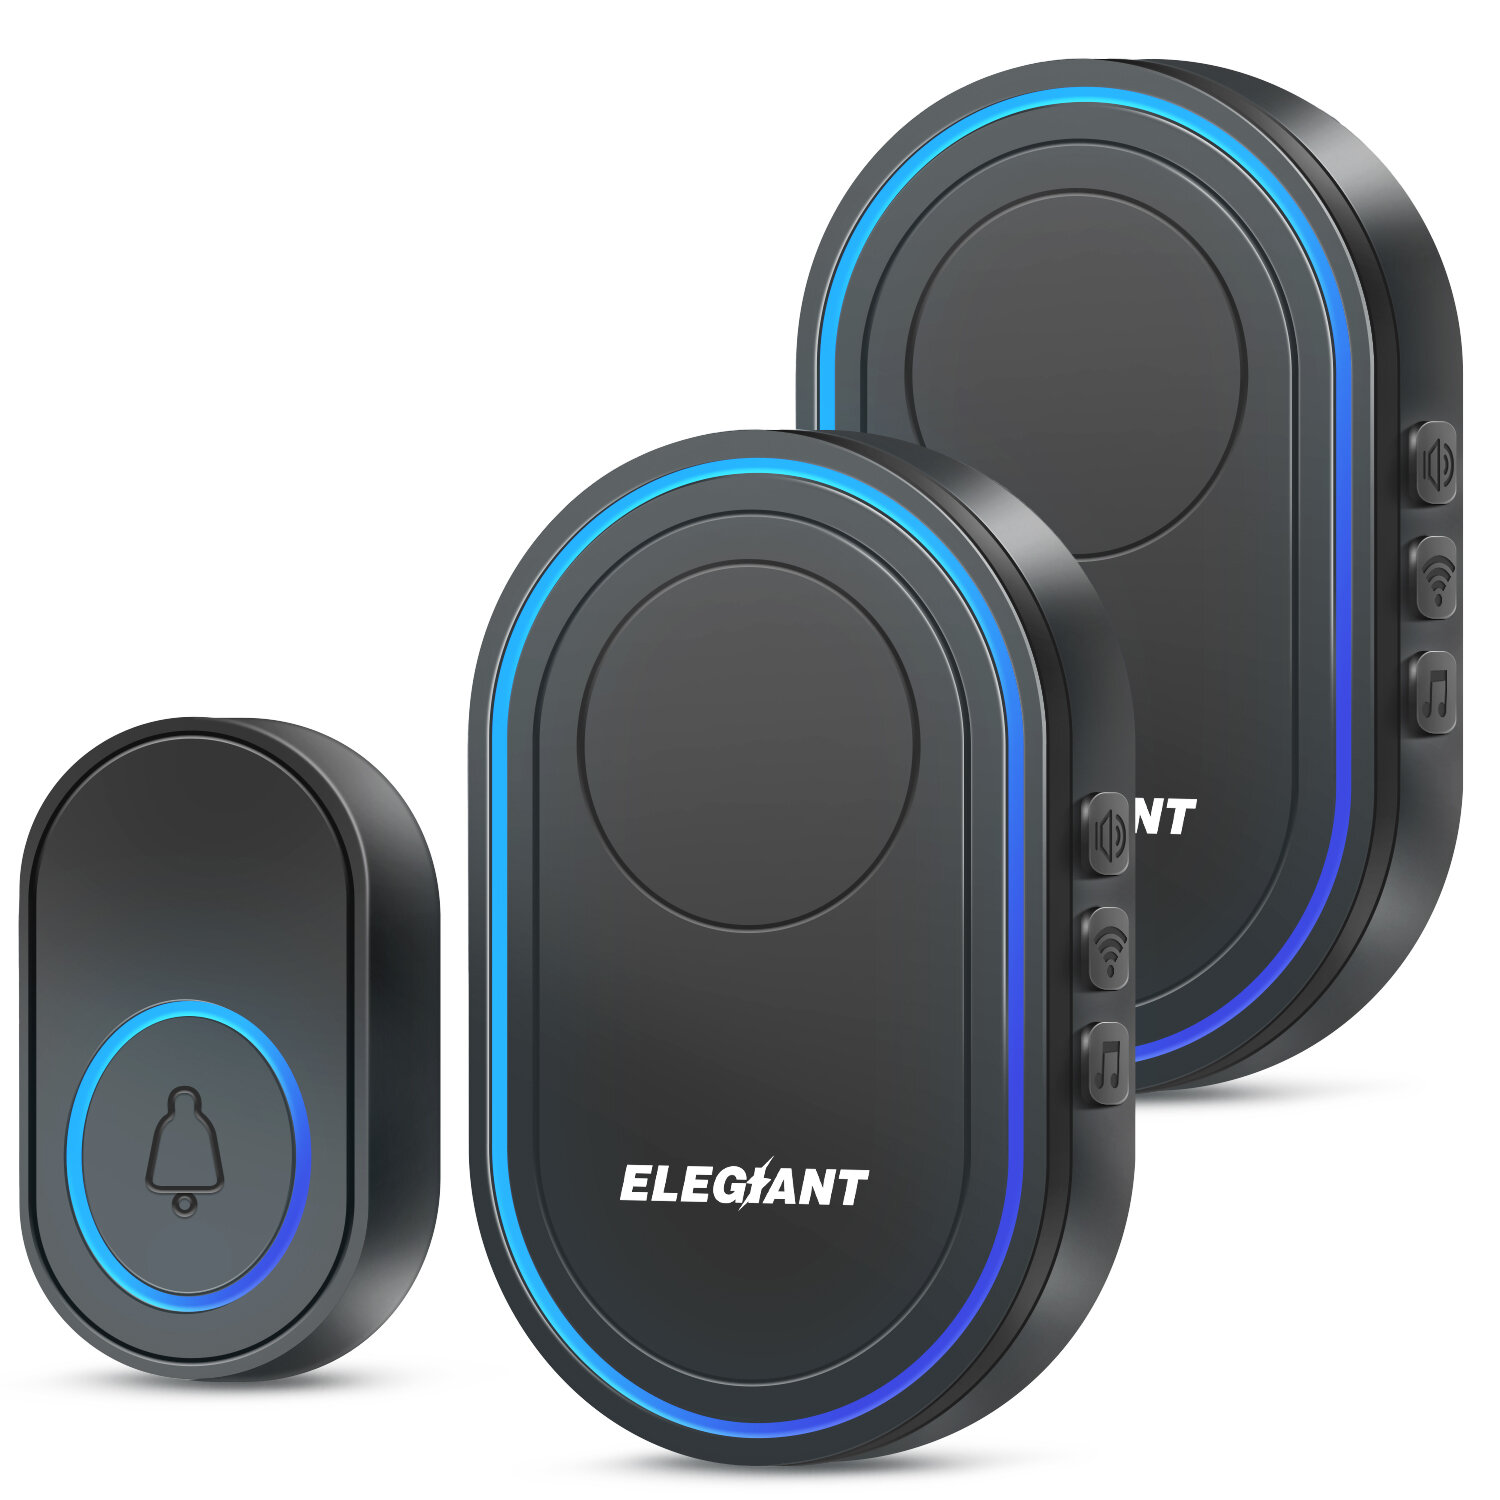 ELEGIANT Wireless Doorbell Waterproof 1Button + 2 Receivers LED Flash Doorbell Chime with 37 Chimes 7 Volume Levels for